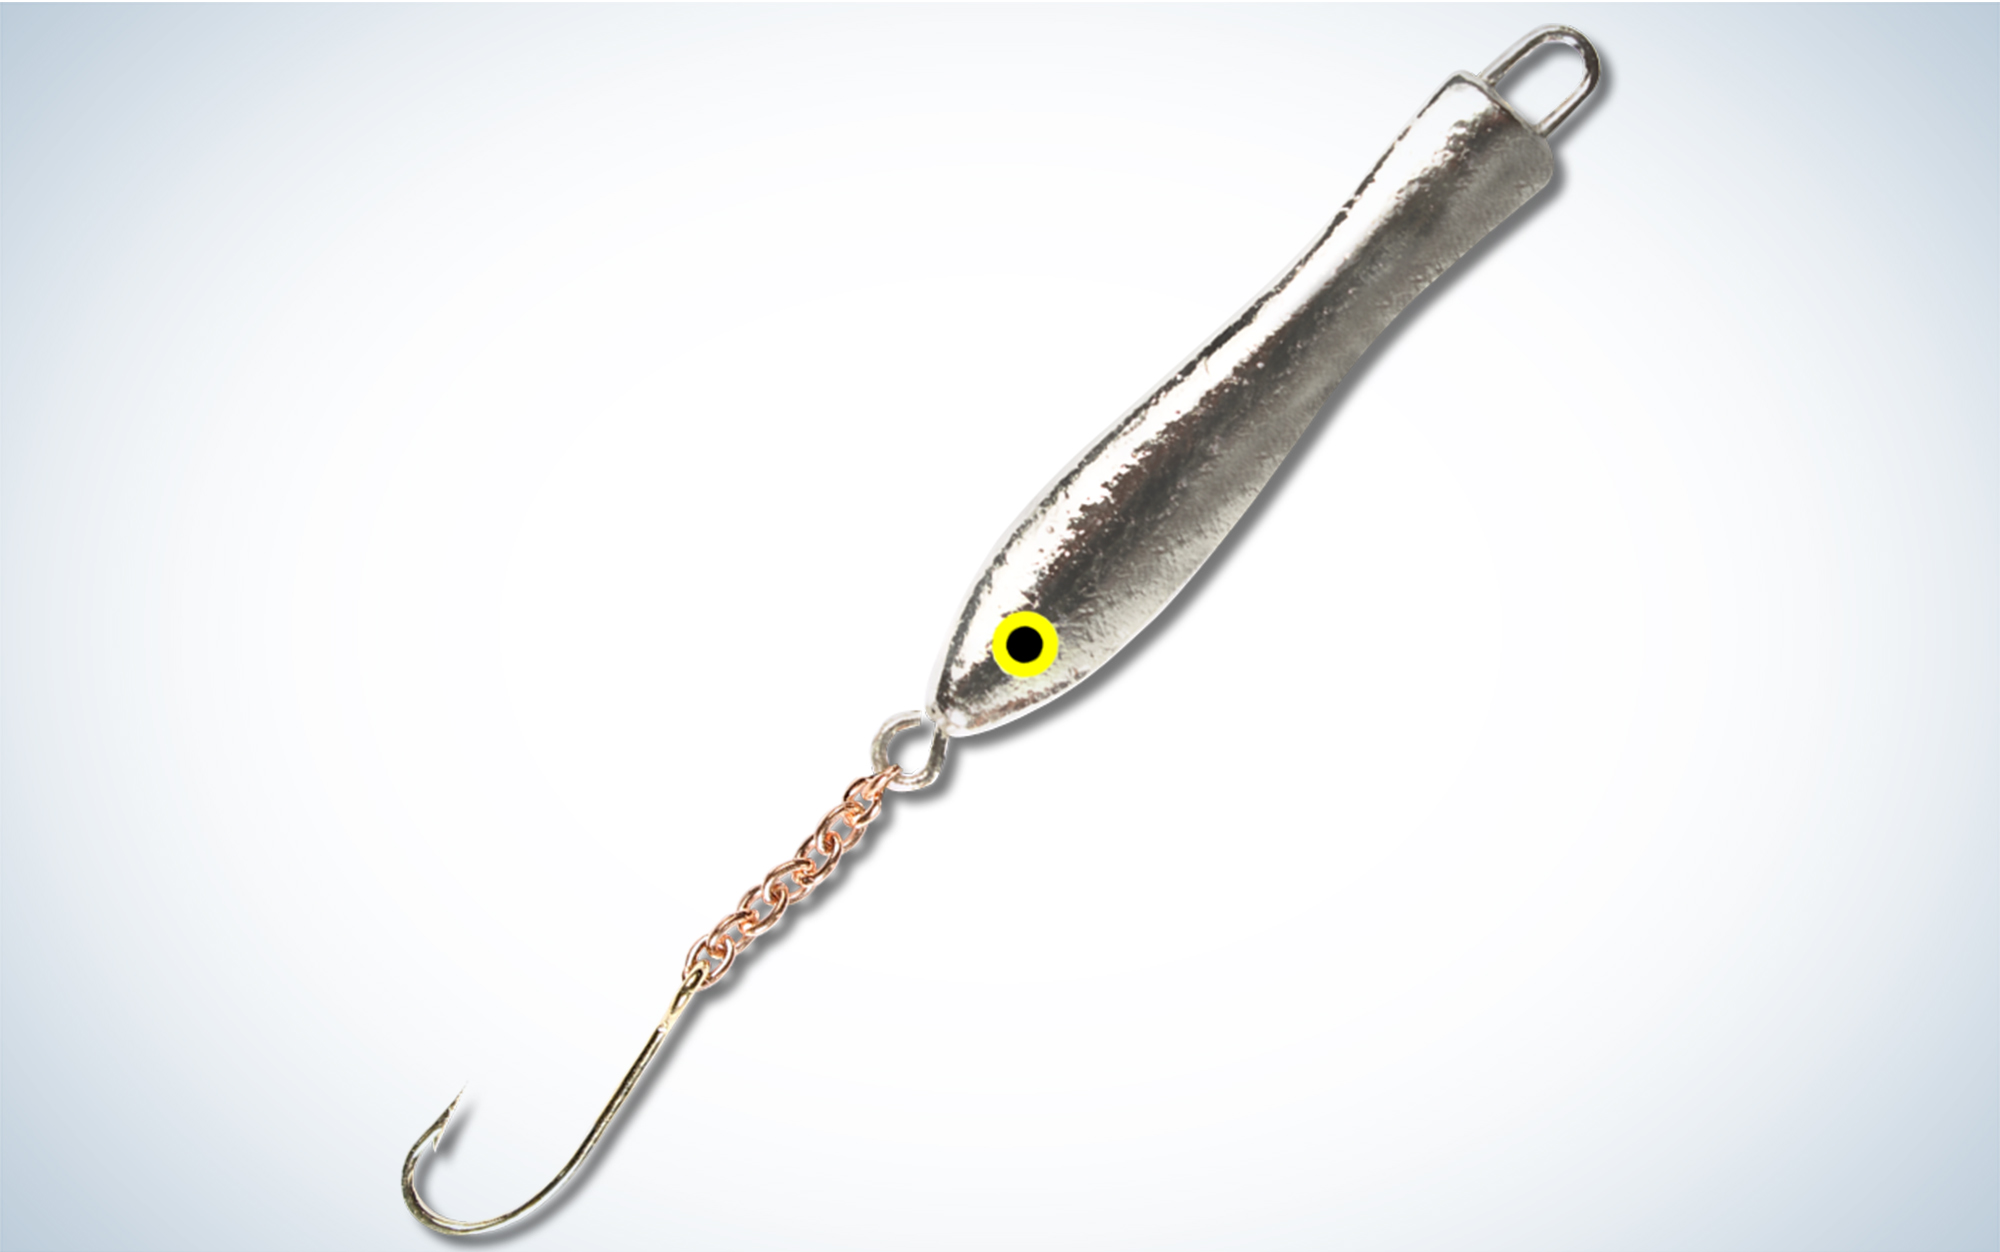 Shuck's Lures jigger minnow is one of the best ice fishing lures for perch.